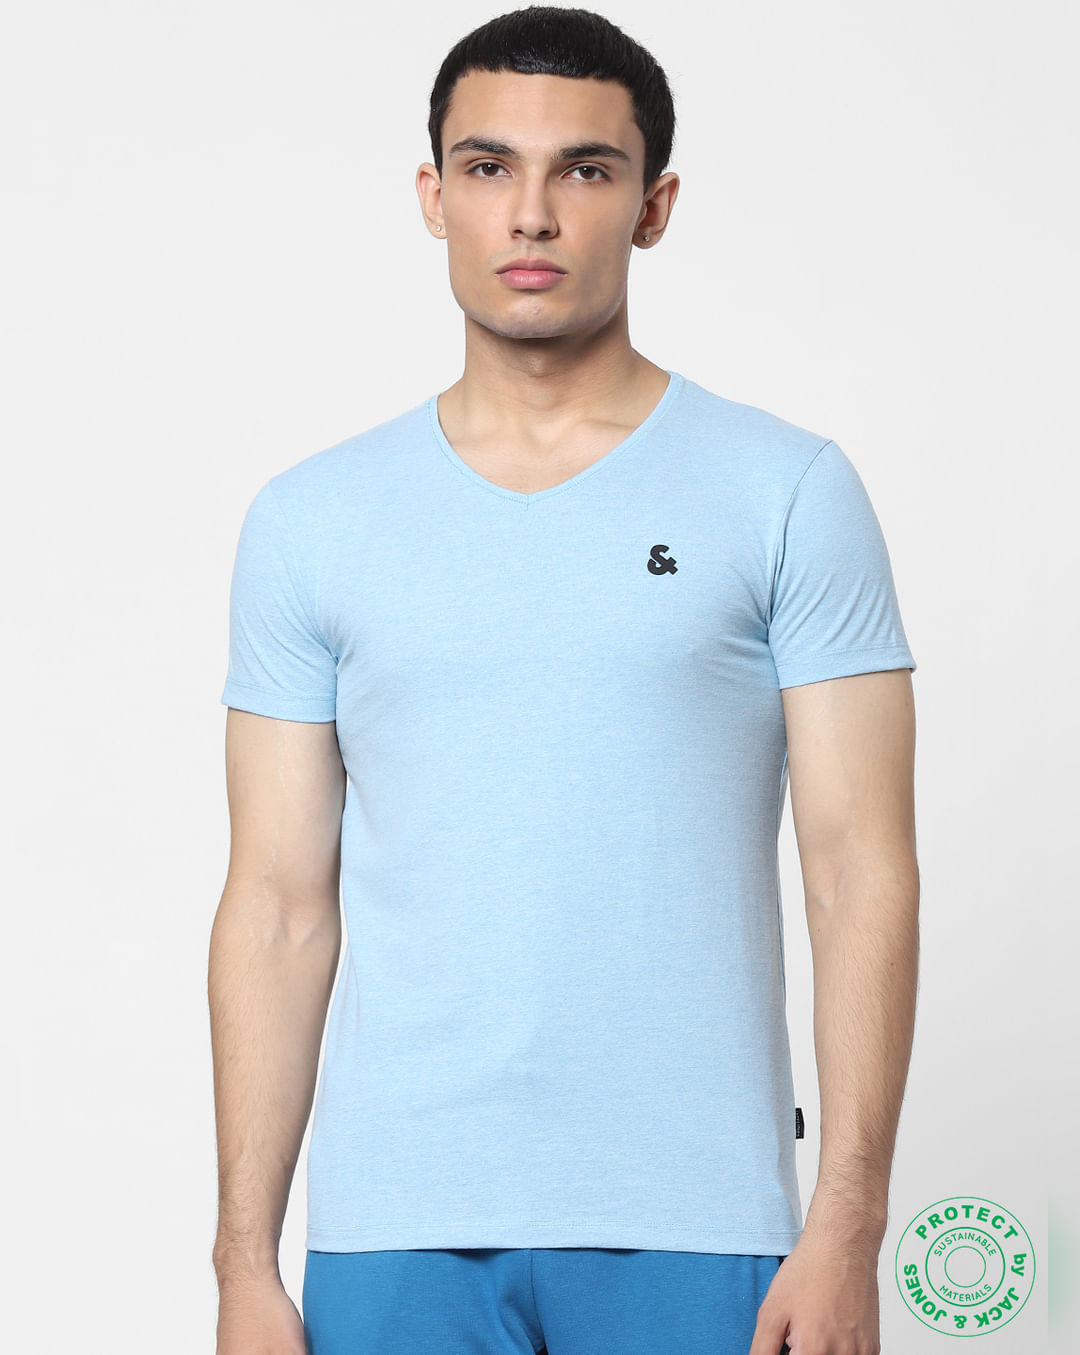 Buy White & Blue V Neck T-shirts - Pack of 2 Online in India - Flat 50% Off